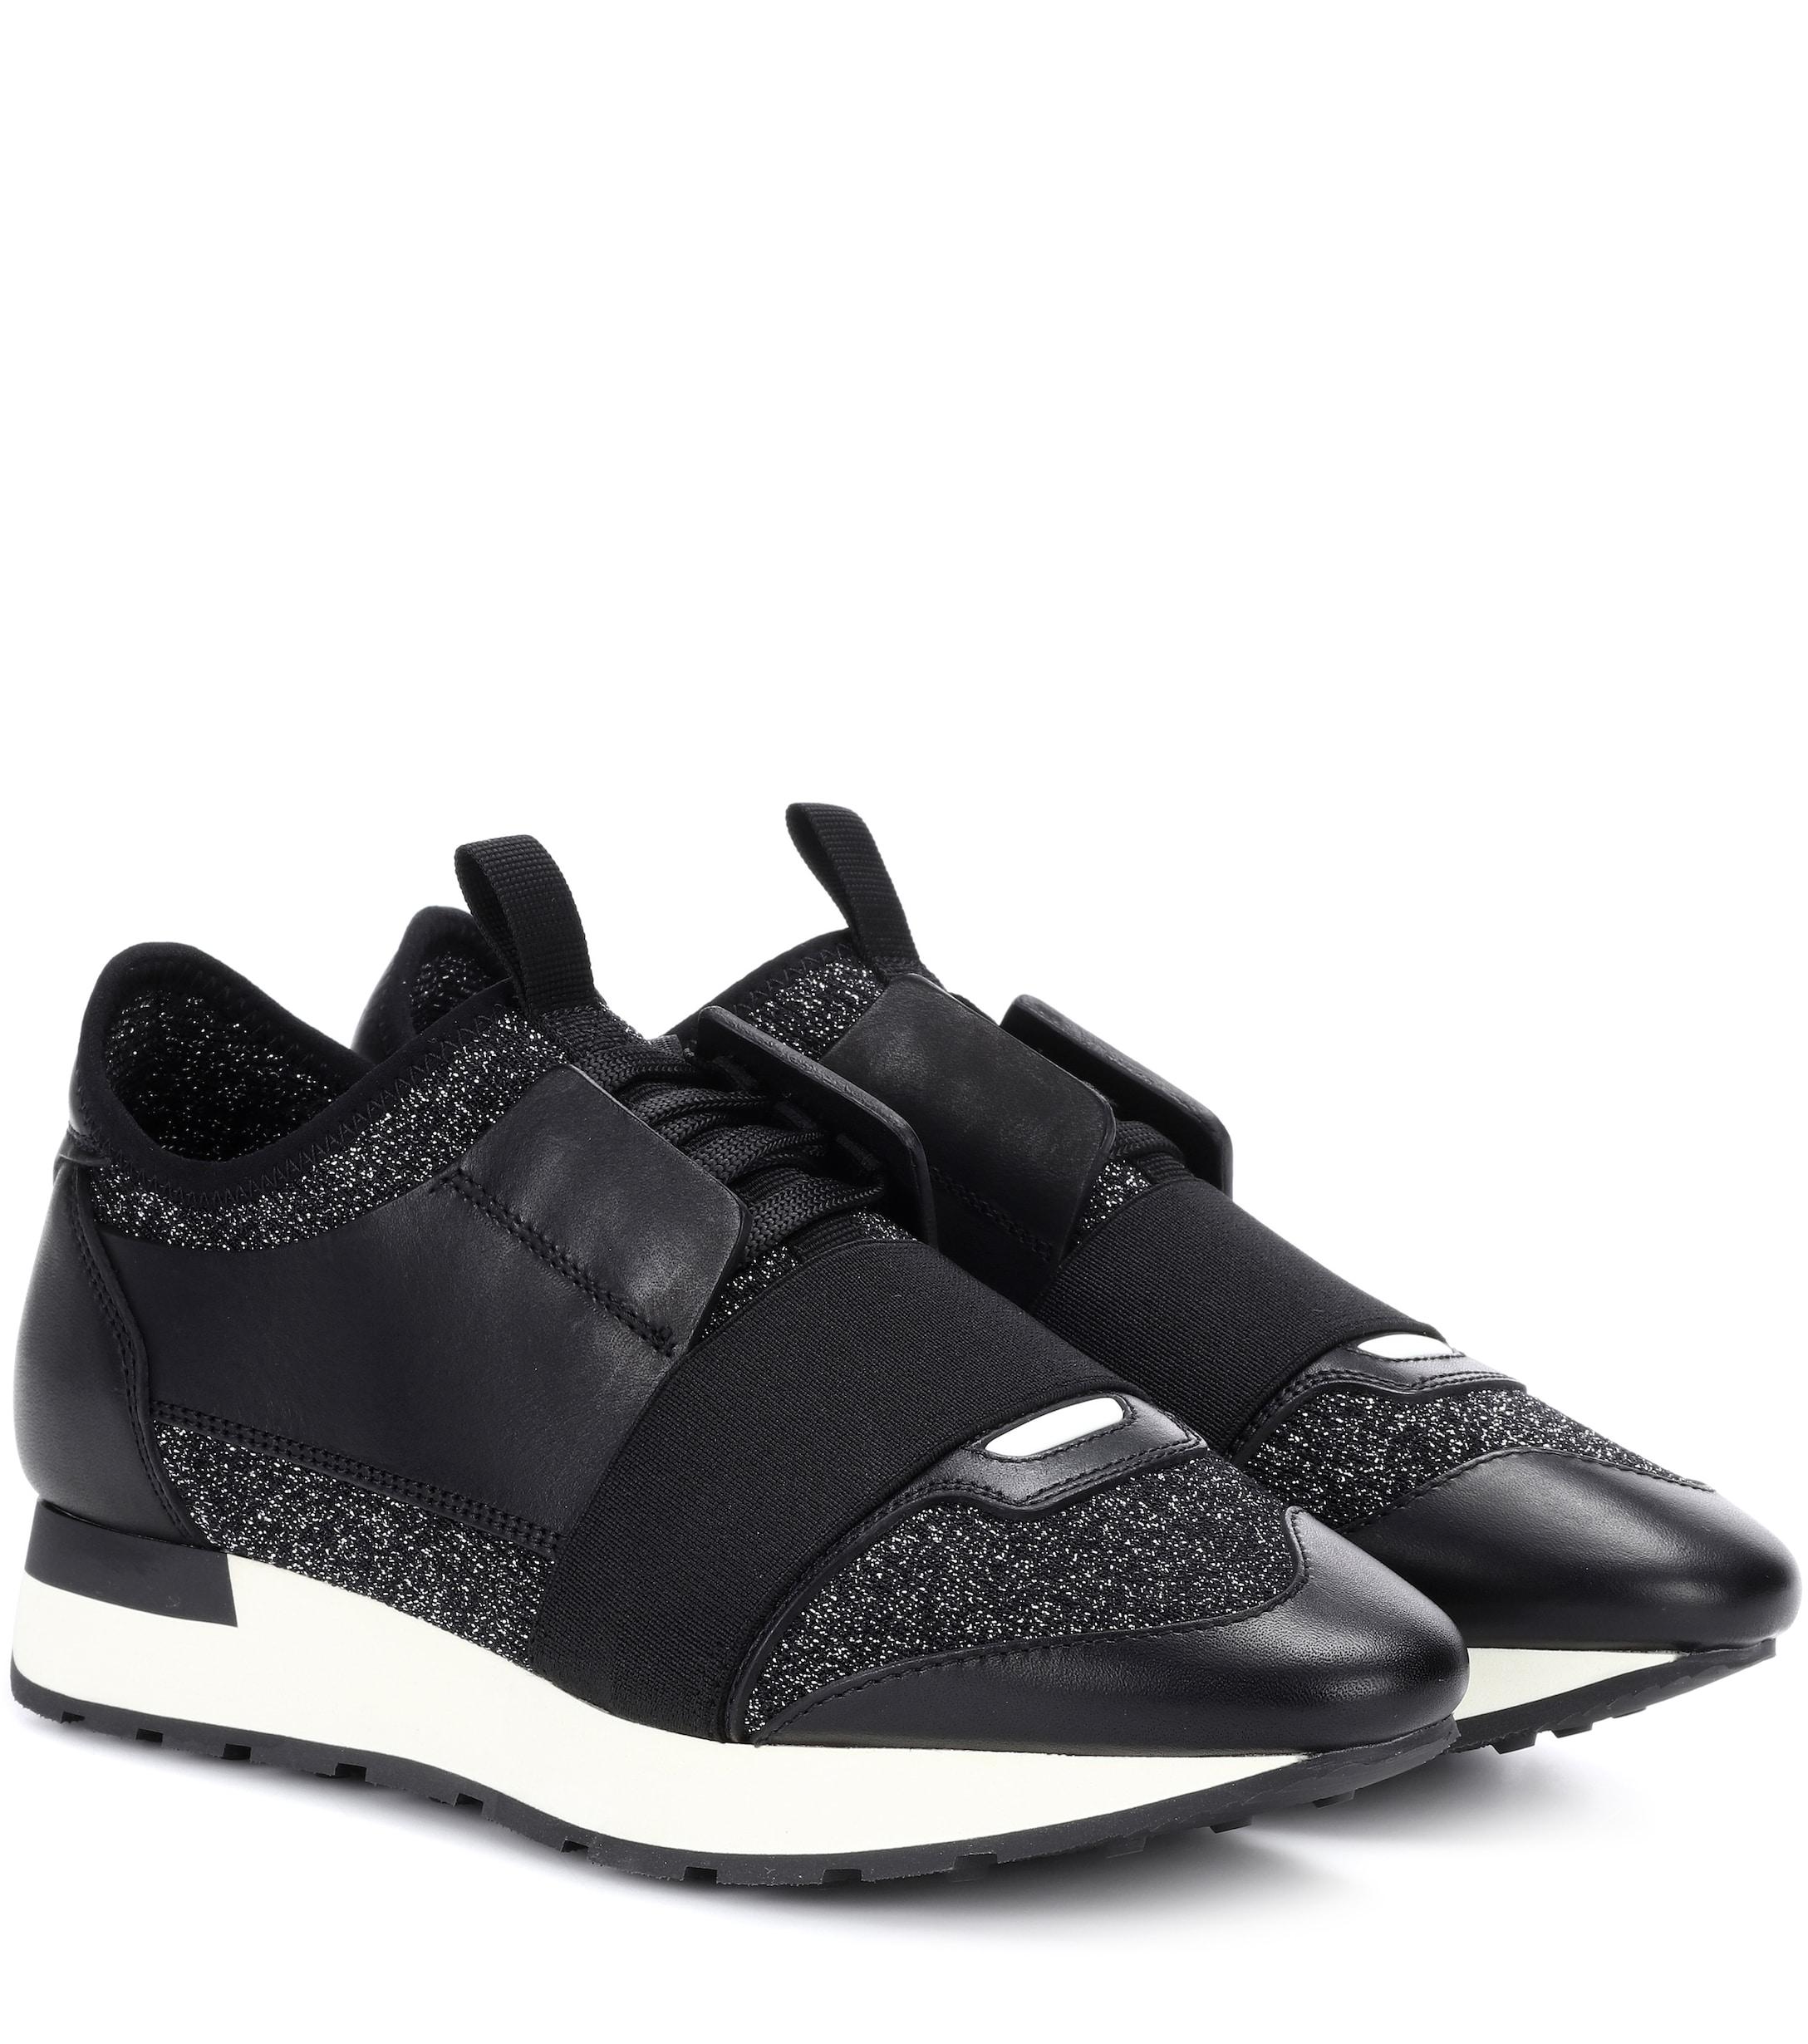 Balenciaga Leather Race Runners in Nero (Black) - Save 77% - Lyst